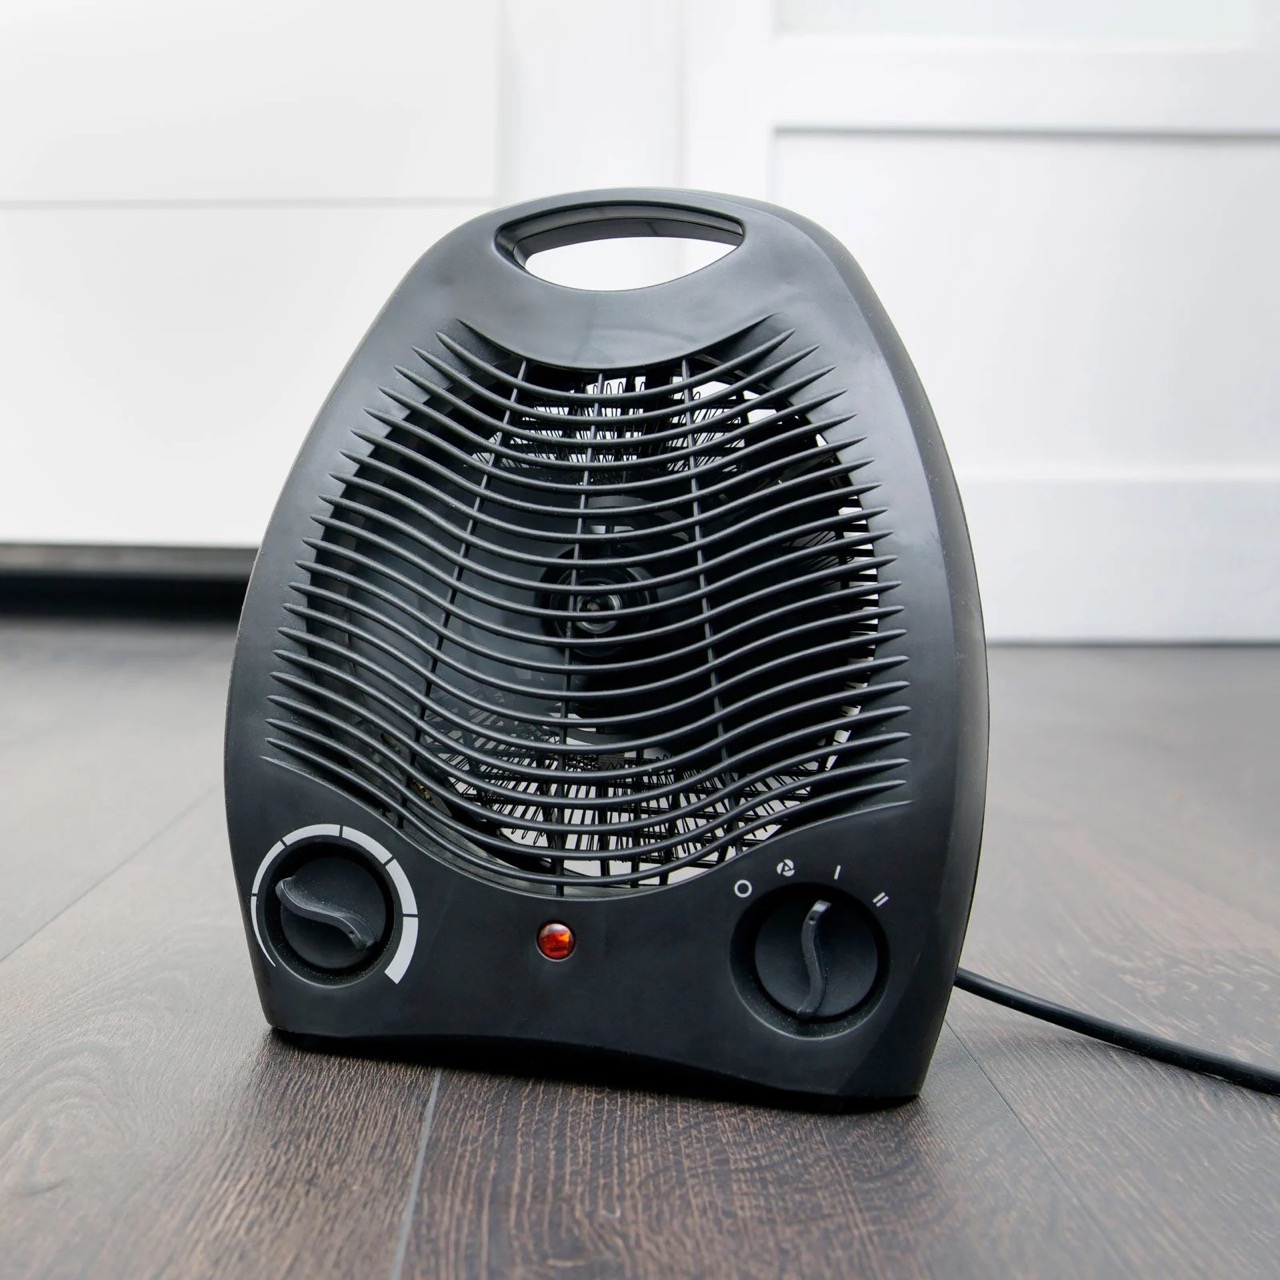 How Many Amps Does A Space Heater Use?